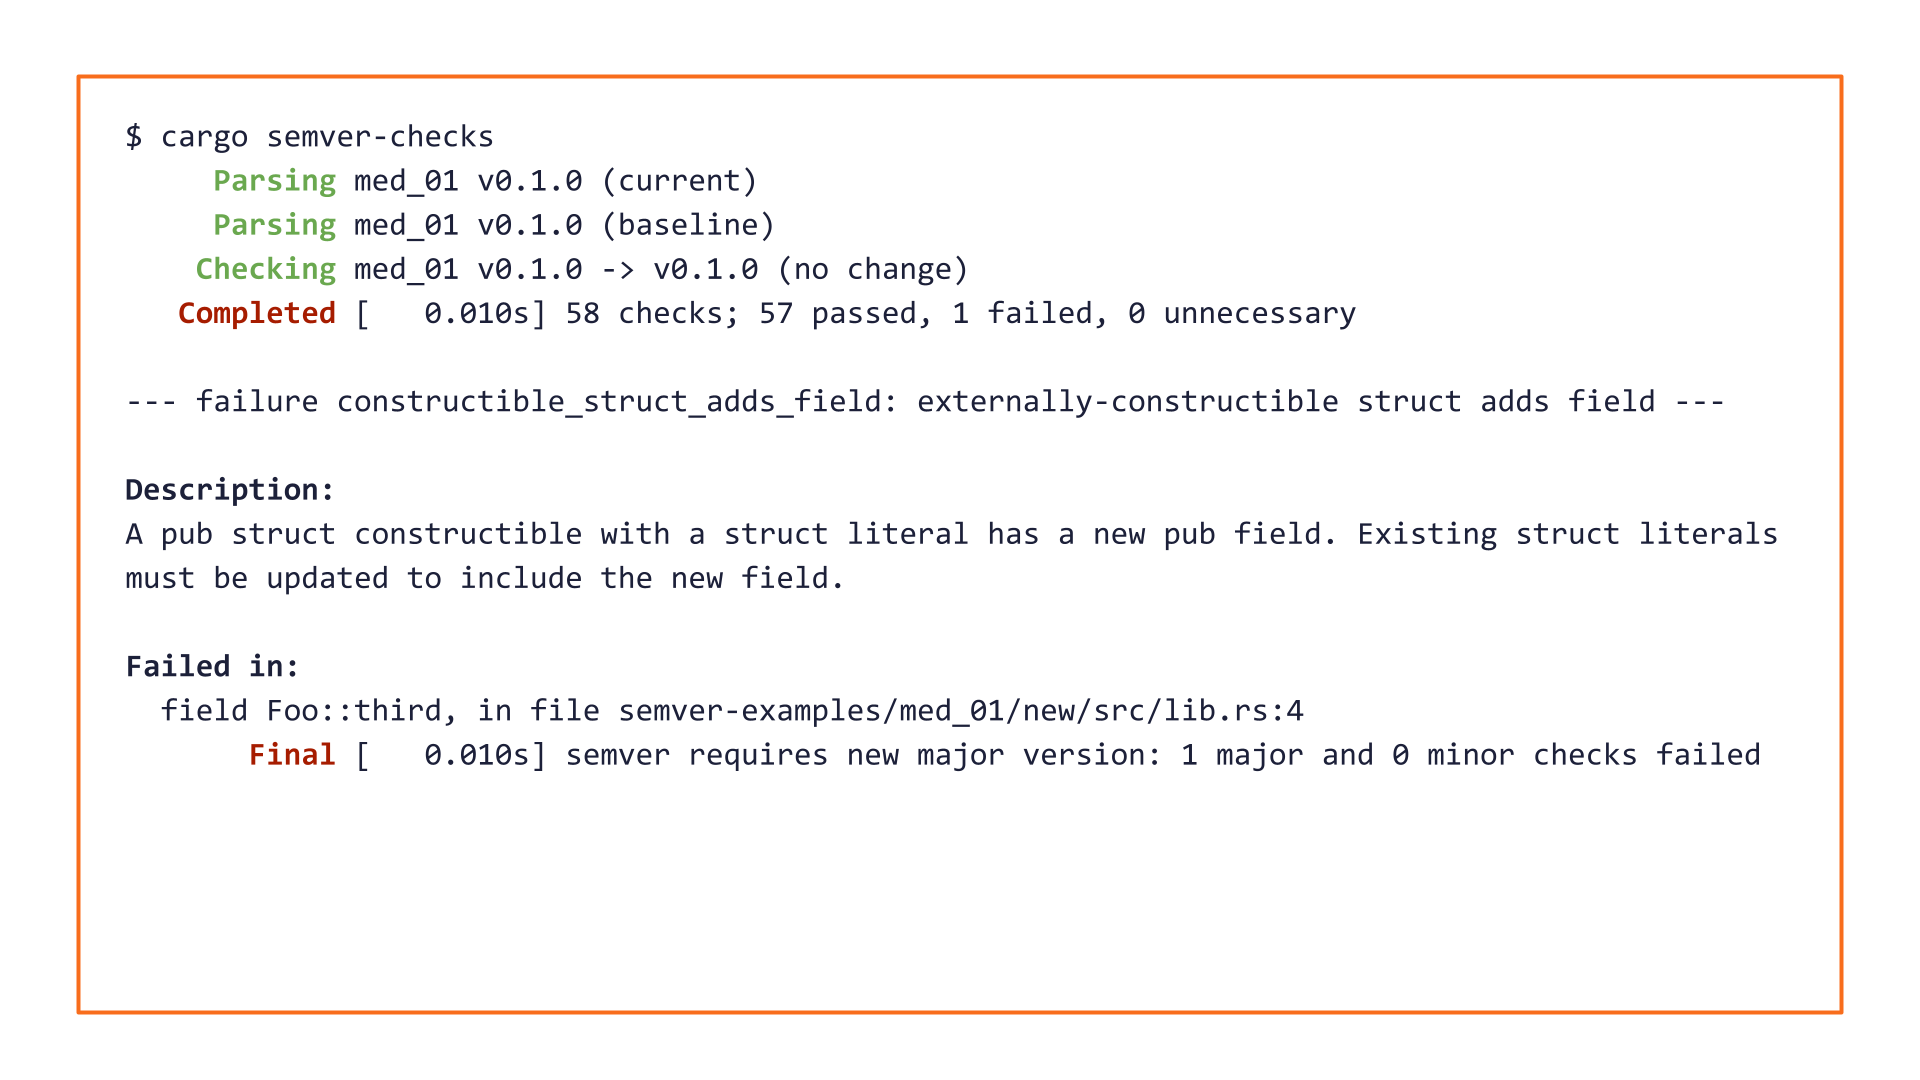 Output of running `cargo semver-checks` on the aforementioned pull request. It indicates the failure of a lint called `constructible_struct_adds_field` which says that a new field has been added to a struct constructible with a literal, which requires that all literals of that struct must be updated to include the new field. The lint identifies the problematic field as `Foo::third` at line 4 in file `src/lib.rs`. The output indicates this is a major breaking change, and the total runtime was 0.010 seconds.